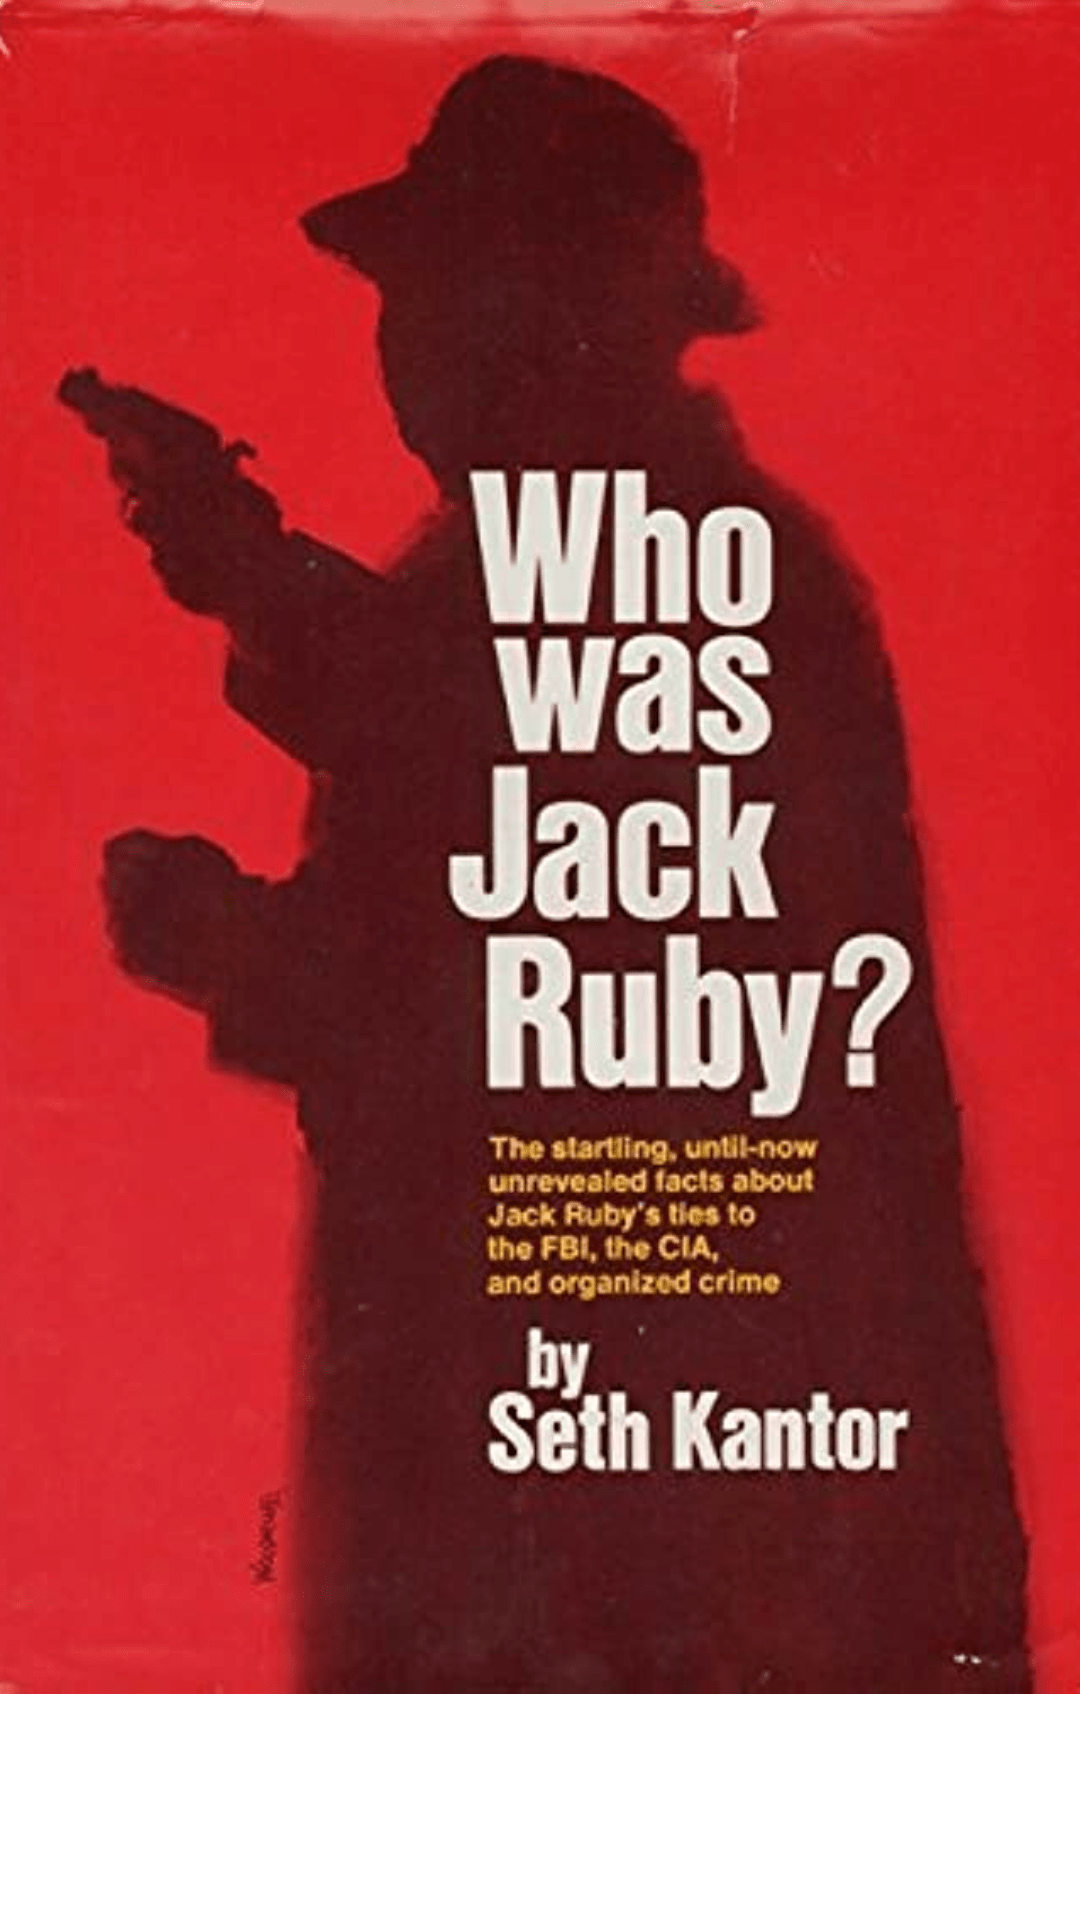 Who was Jack Ruby? The startling, until-now unrevealed facts about Jack Ruby's lies to the FBI, the CIA, and the organized crime